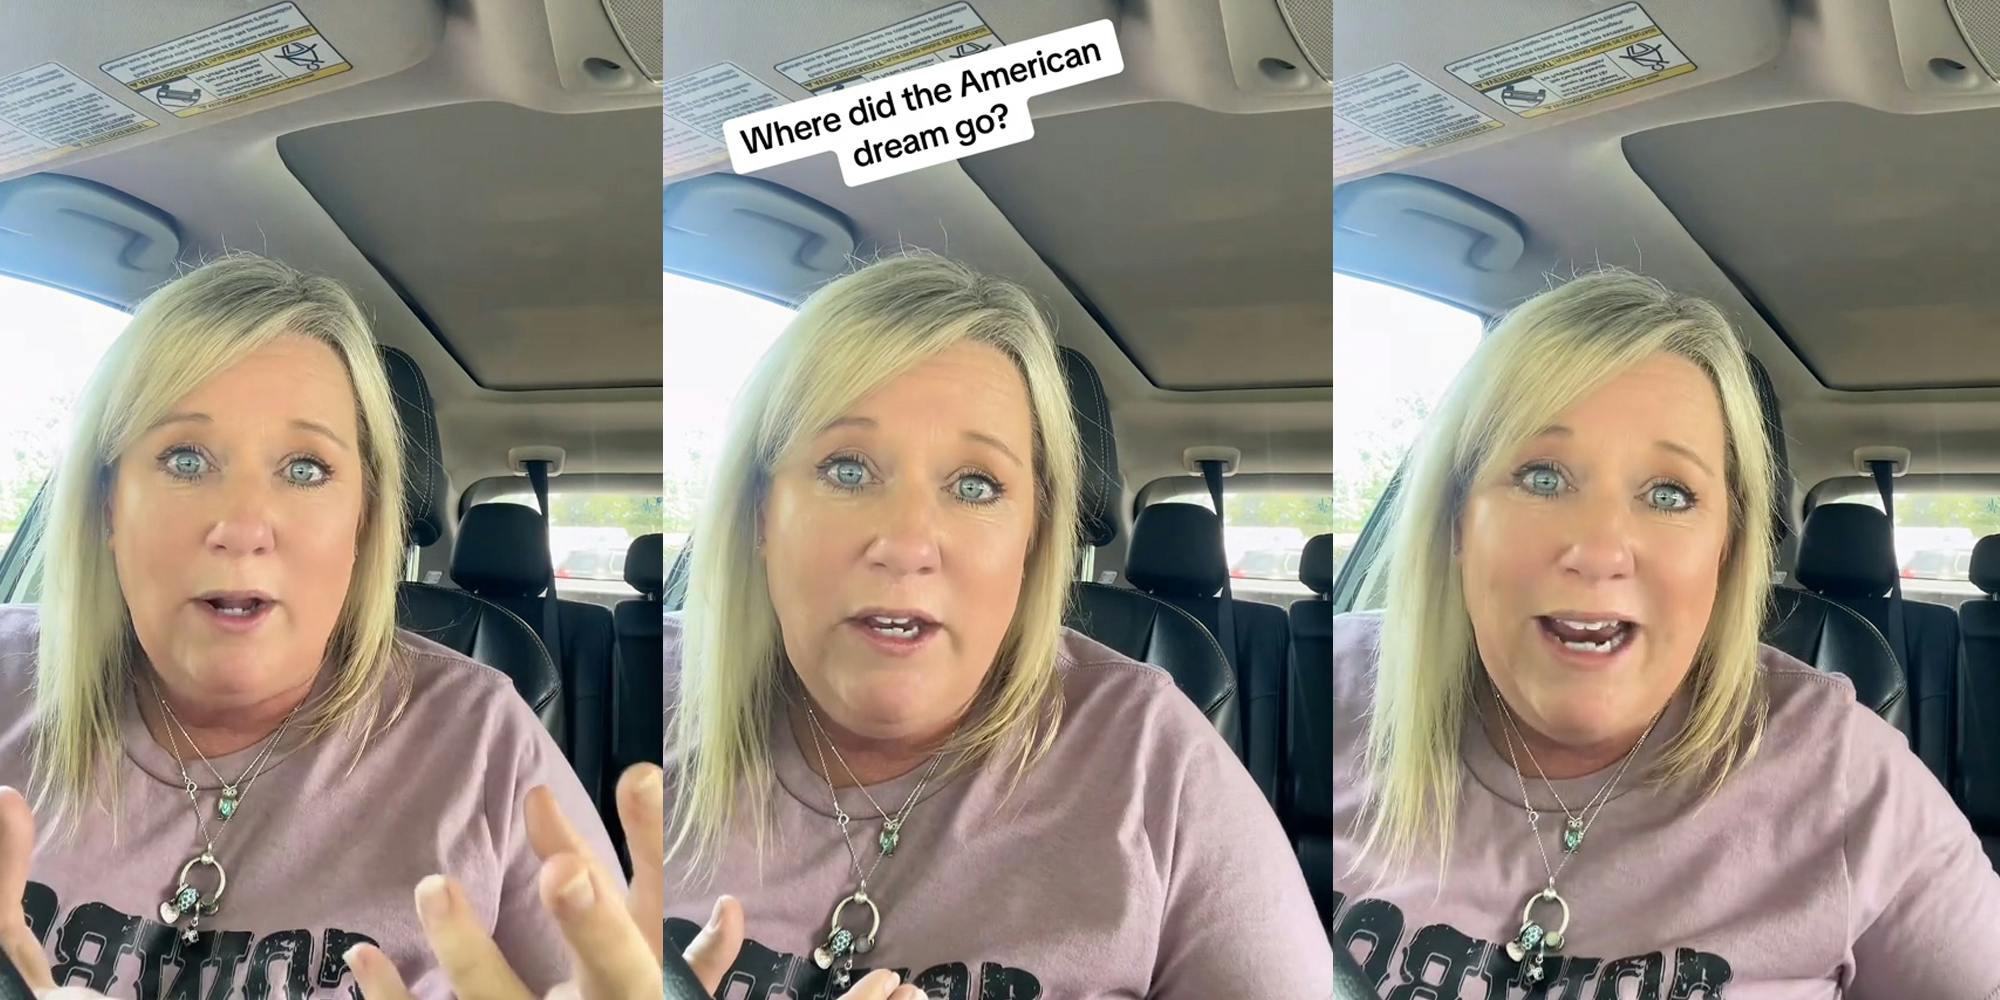 woman speaking in car (l) woman speaking in car with caption "Where did the American dream go?" (c) woman speaking in car (r)